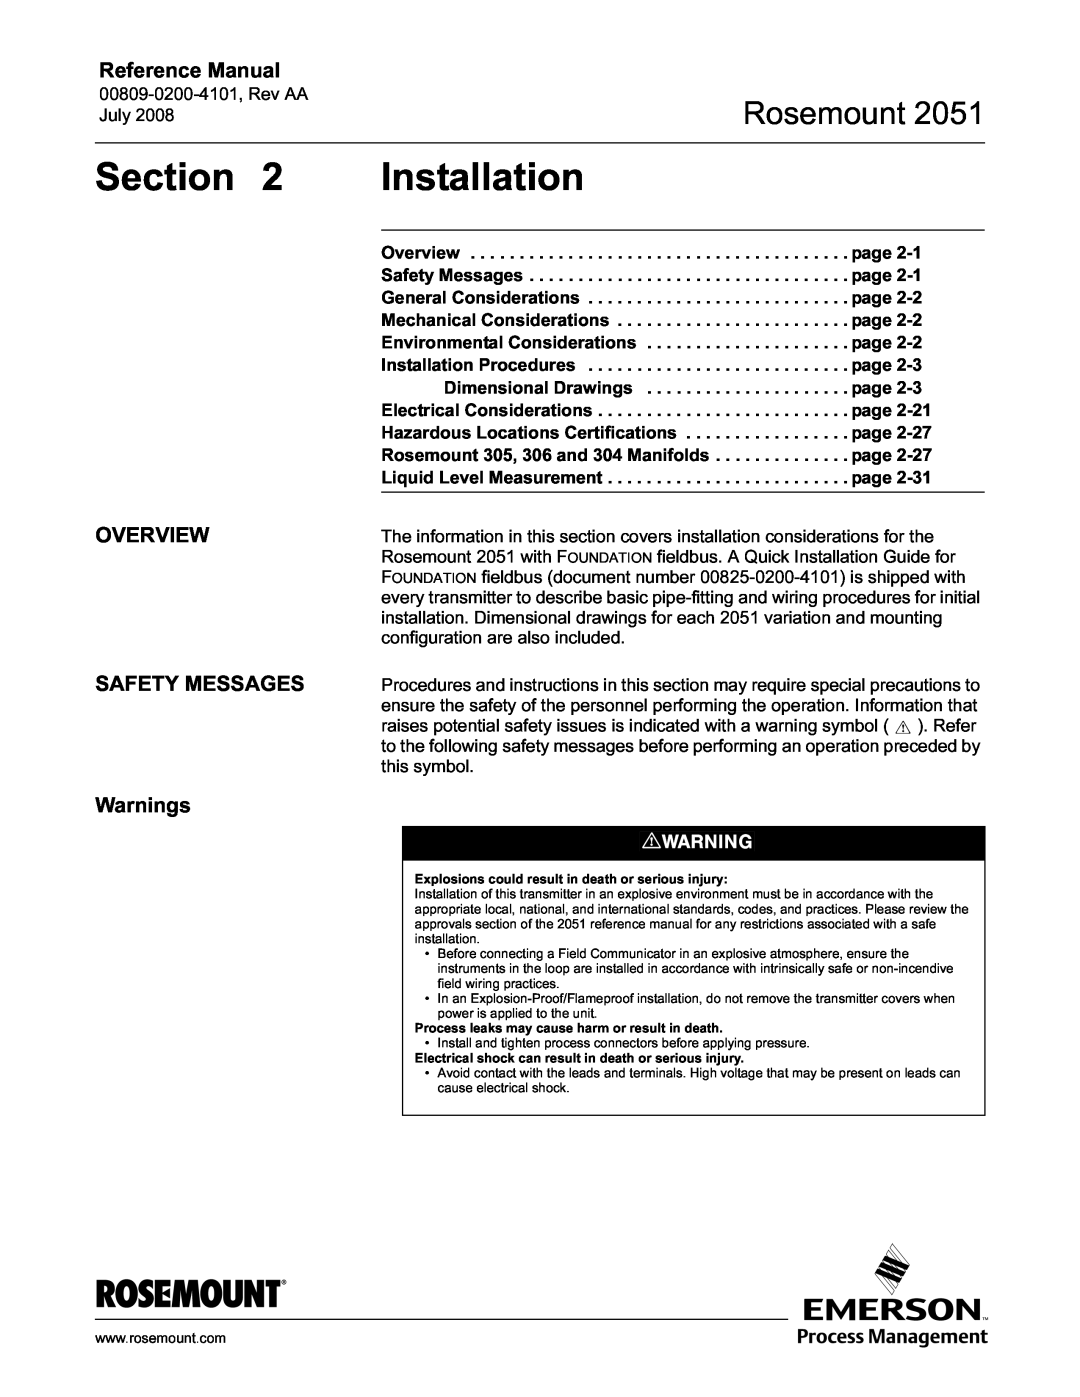 Emerson Process Management 2051 Installation, OVERVIEW SAFETY MESSAGES Warnings, Section, Rosemount, Reference Manual 